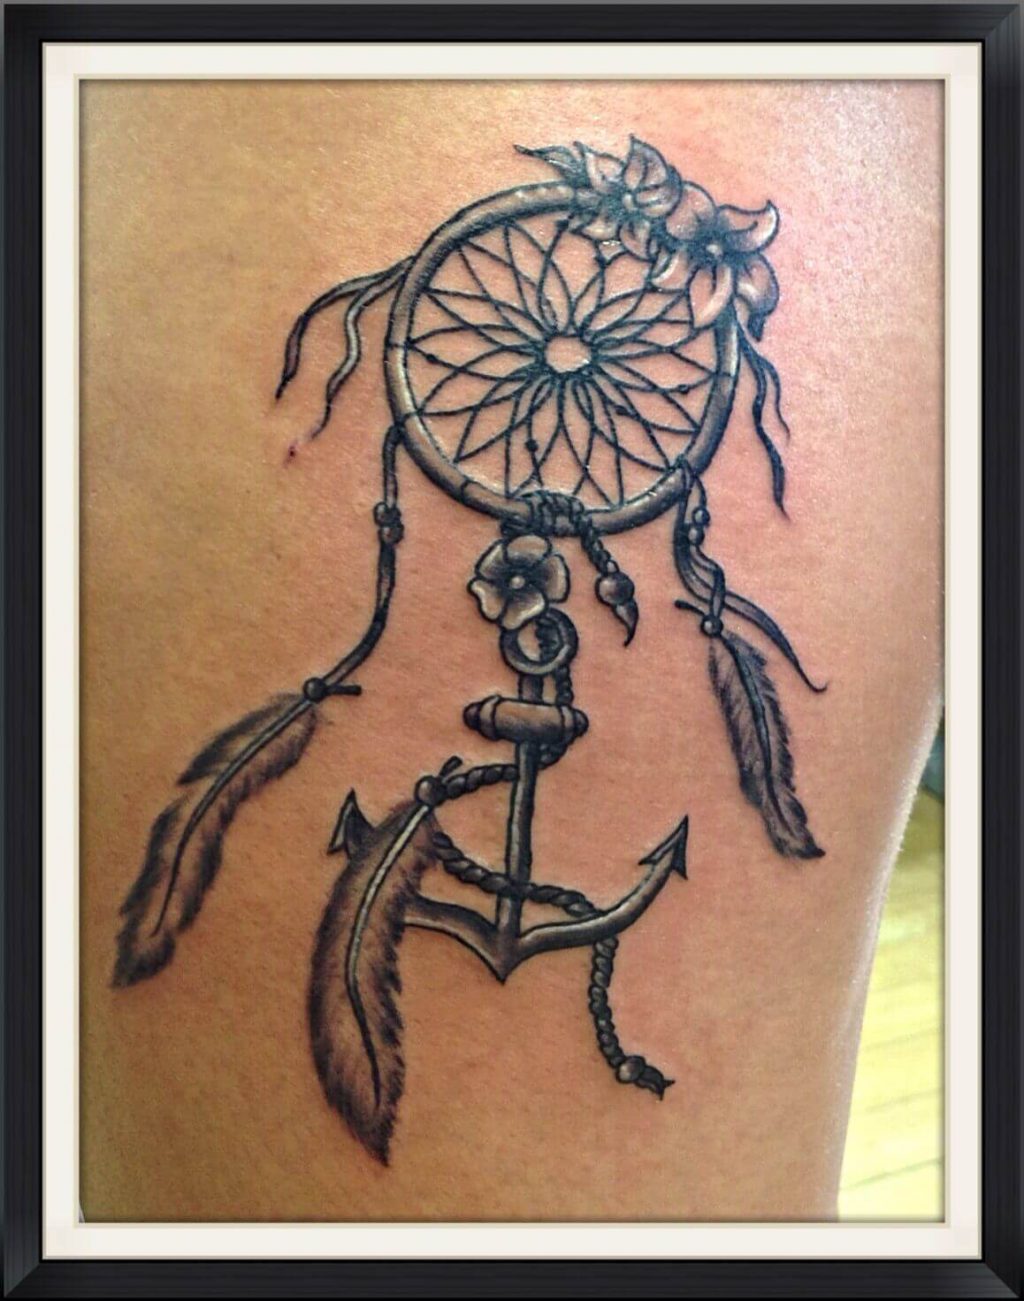 Dreamcatcher & Anchor Tattoo Meaning